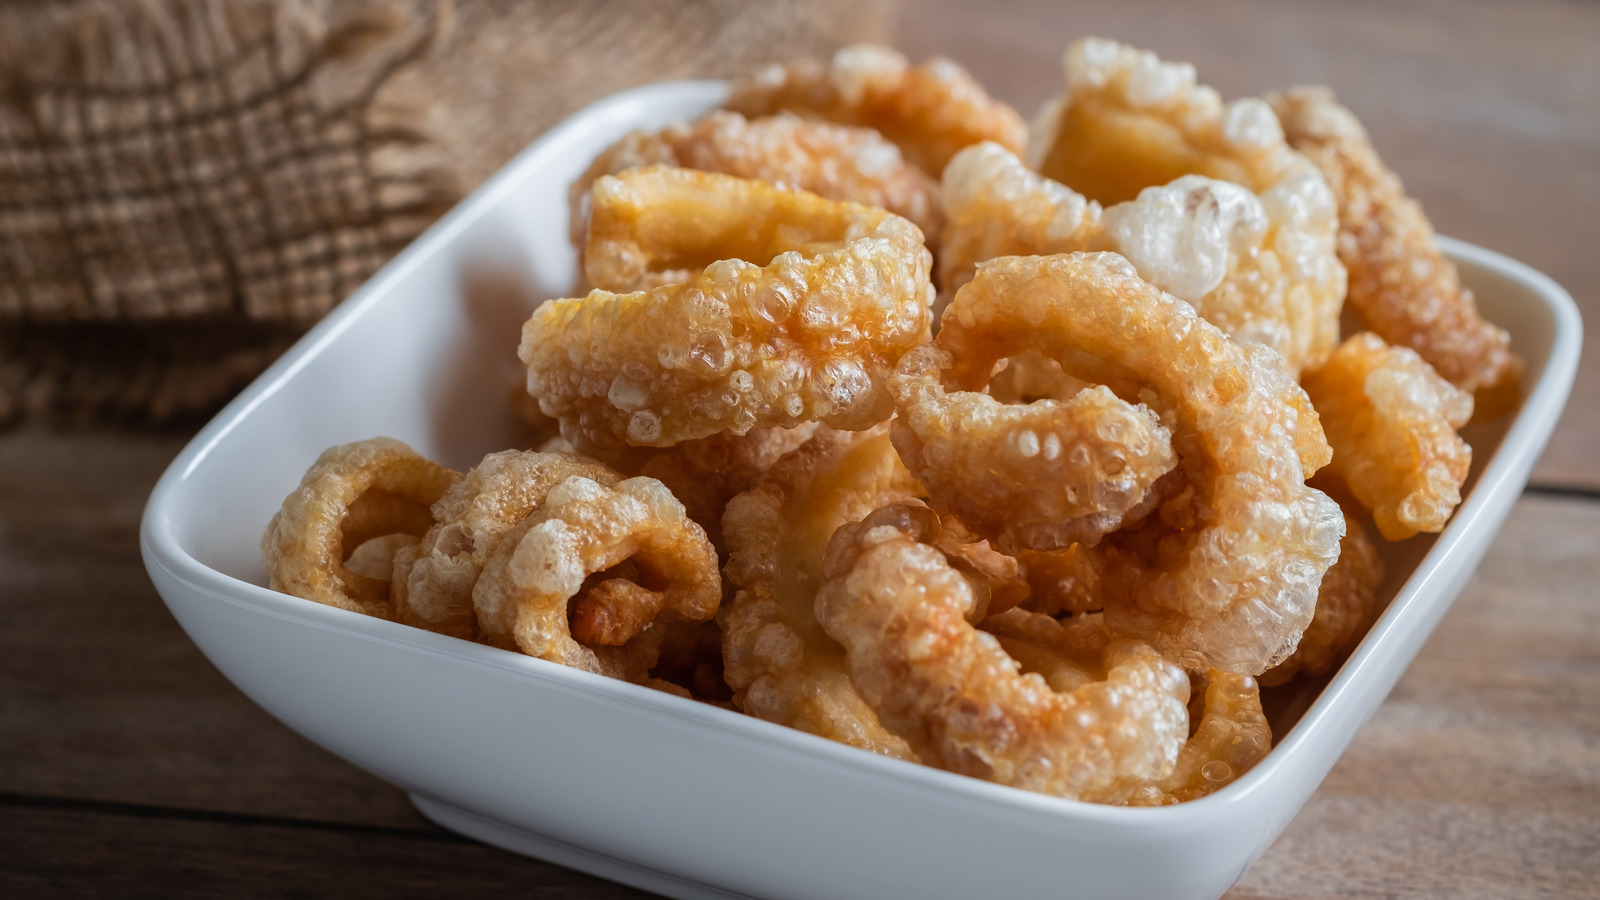 Are Pork Rinds Good For You? - Health Digest